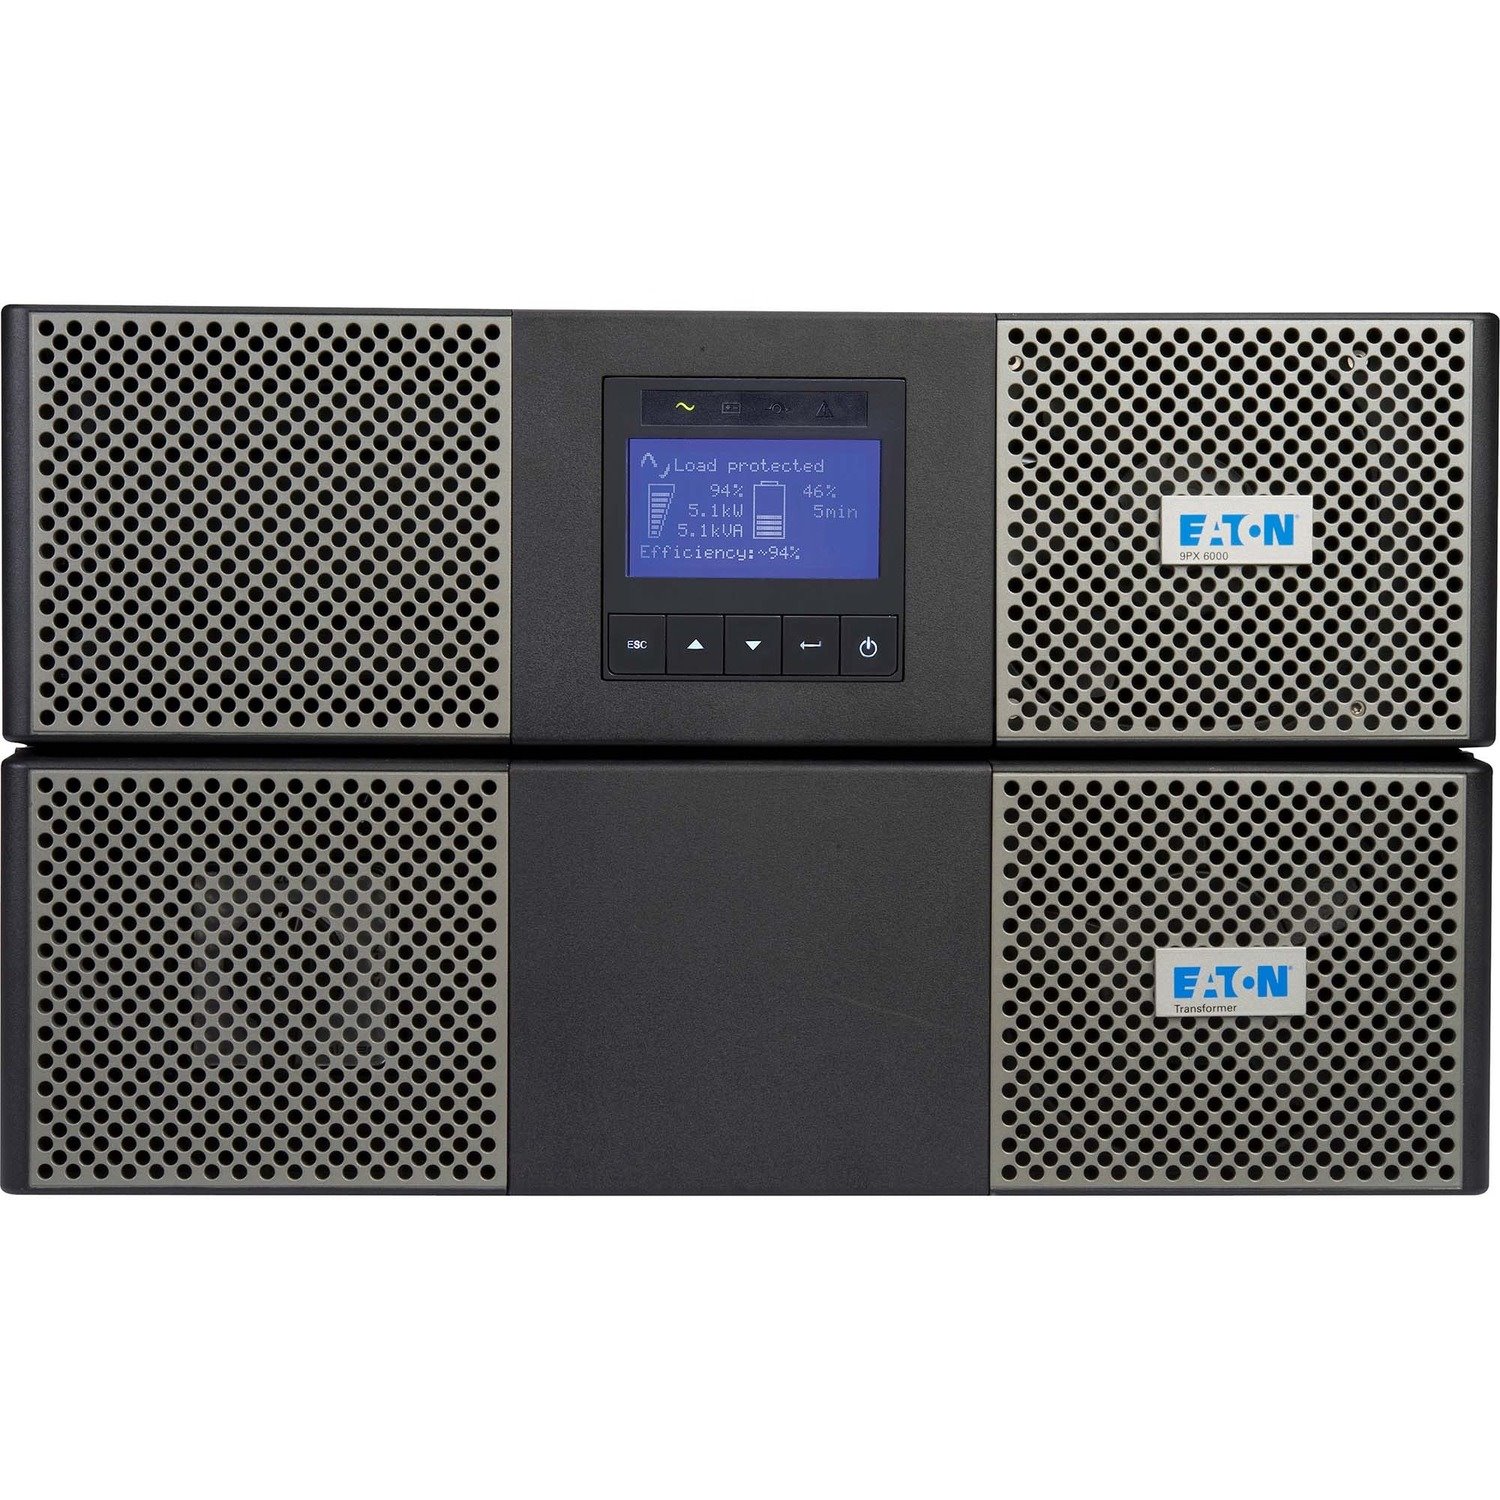 Eaton 9PX 3000VA 3000W 208V Online Double-Conversion UPS - L6-30P, 18x 5-20R, 2 L6-20R, 1 L6-30R Outlets, Cybersecure Network Card, Extended Run, 6U Rack/Tower - Battery Backup